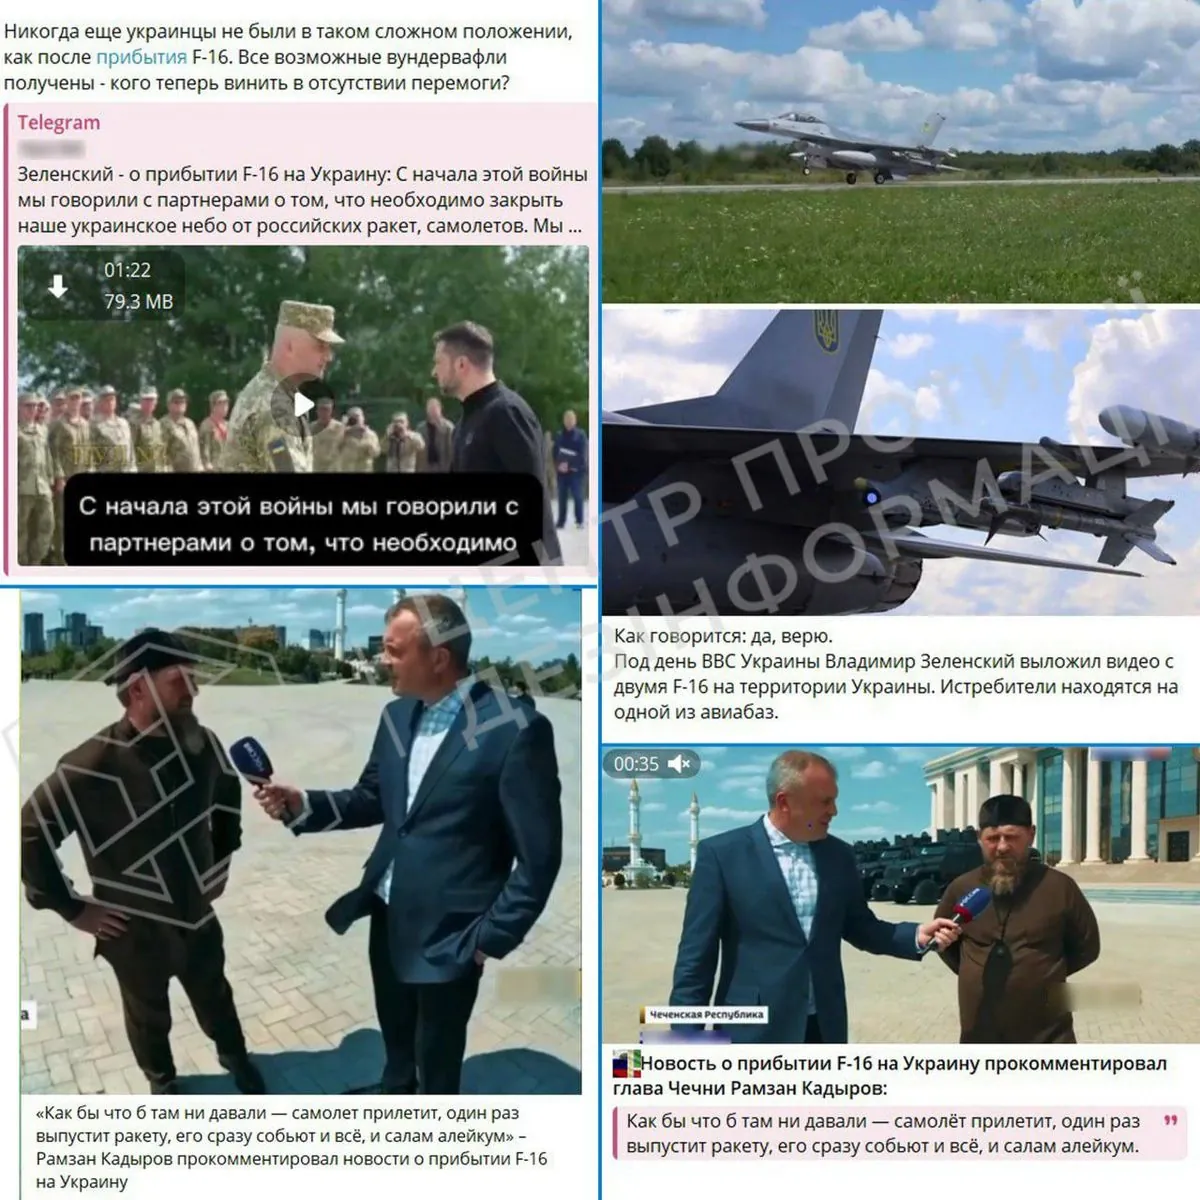 russia-is-trying-to-discredit-the-appearance-of-f-16-in-ukraine-through-propagandists-cpj